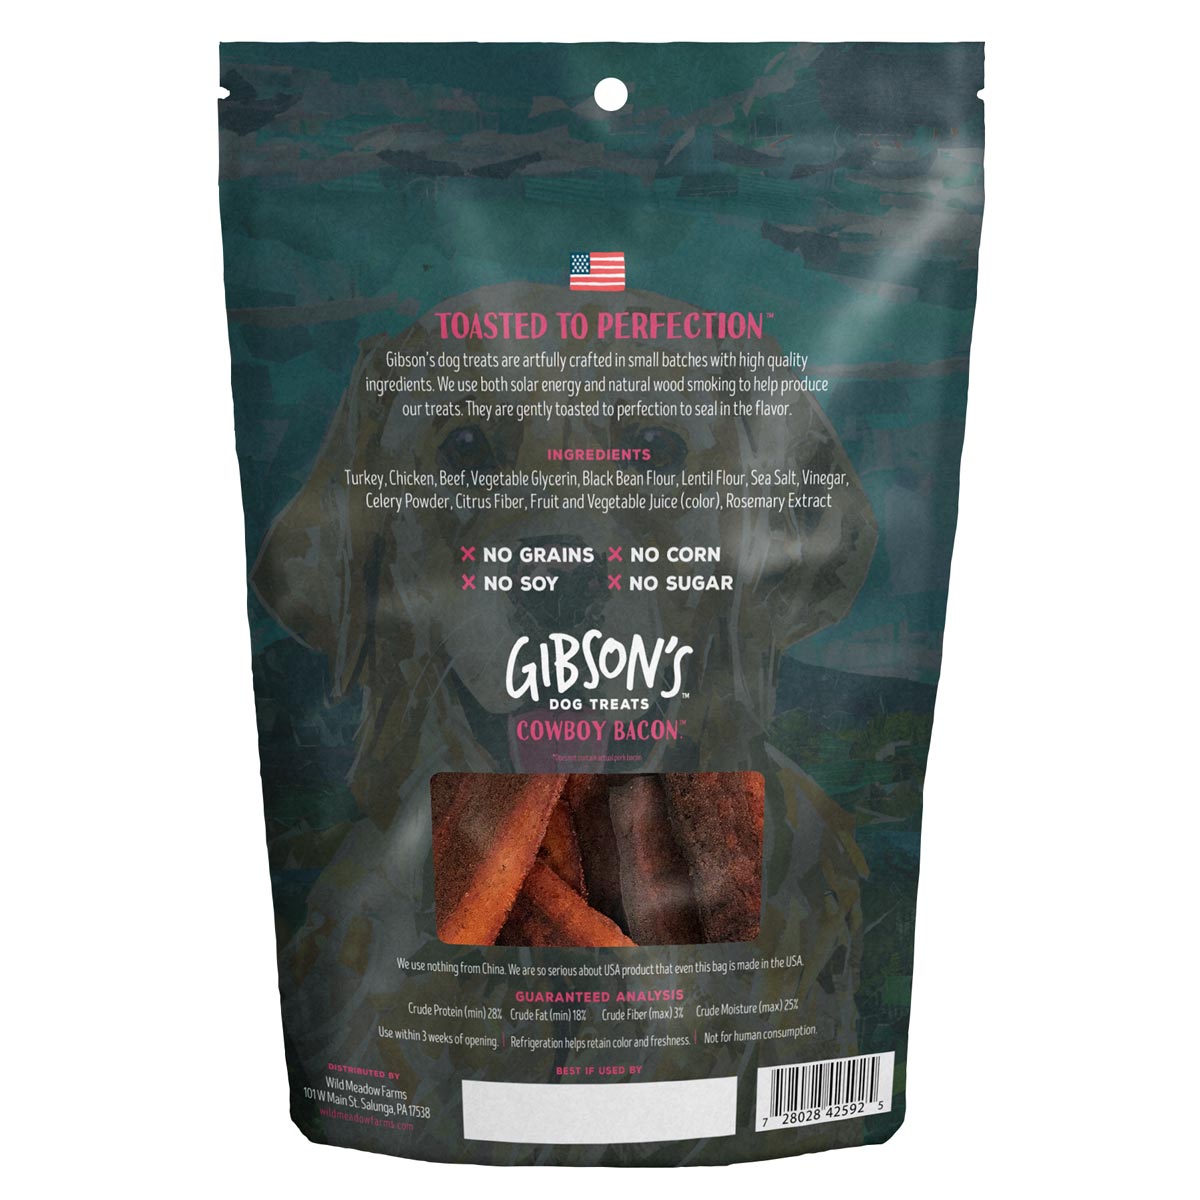 Gibson's Toasted Cowboy Bacon with Beef Jerky Dog Treats